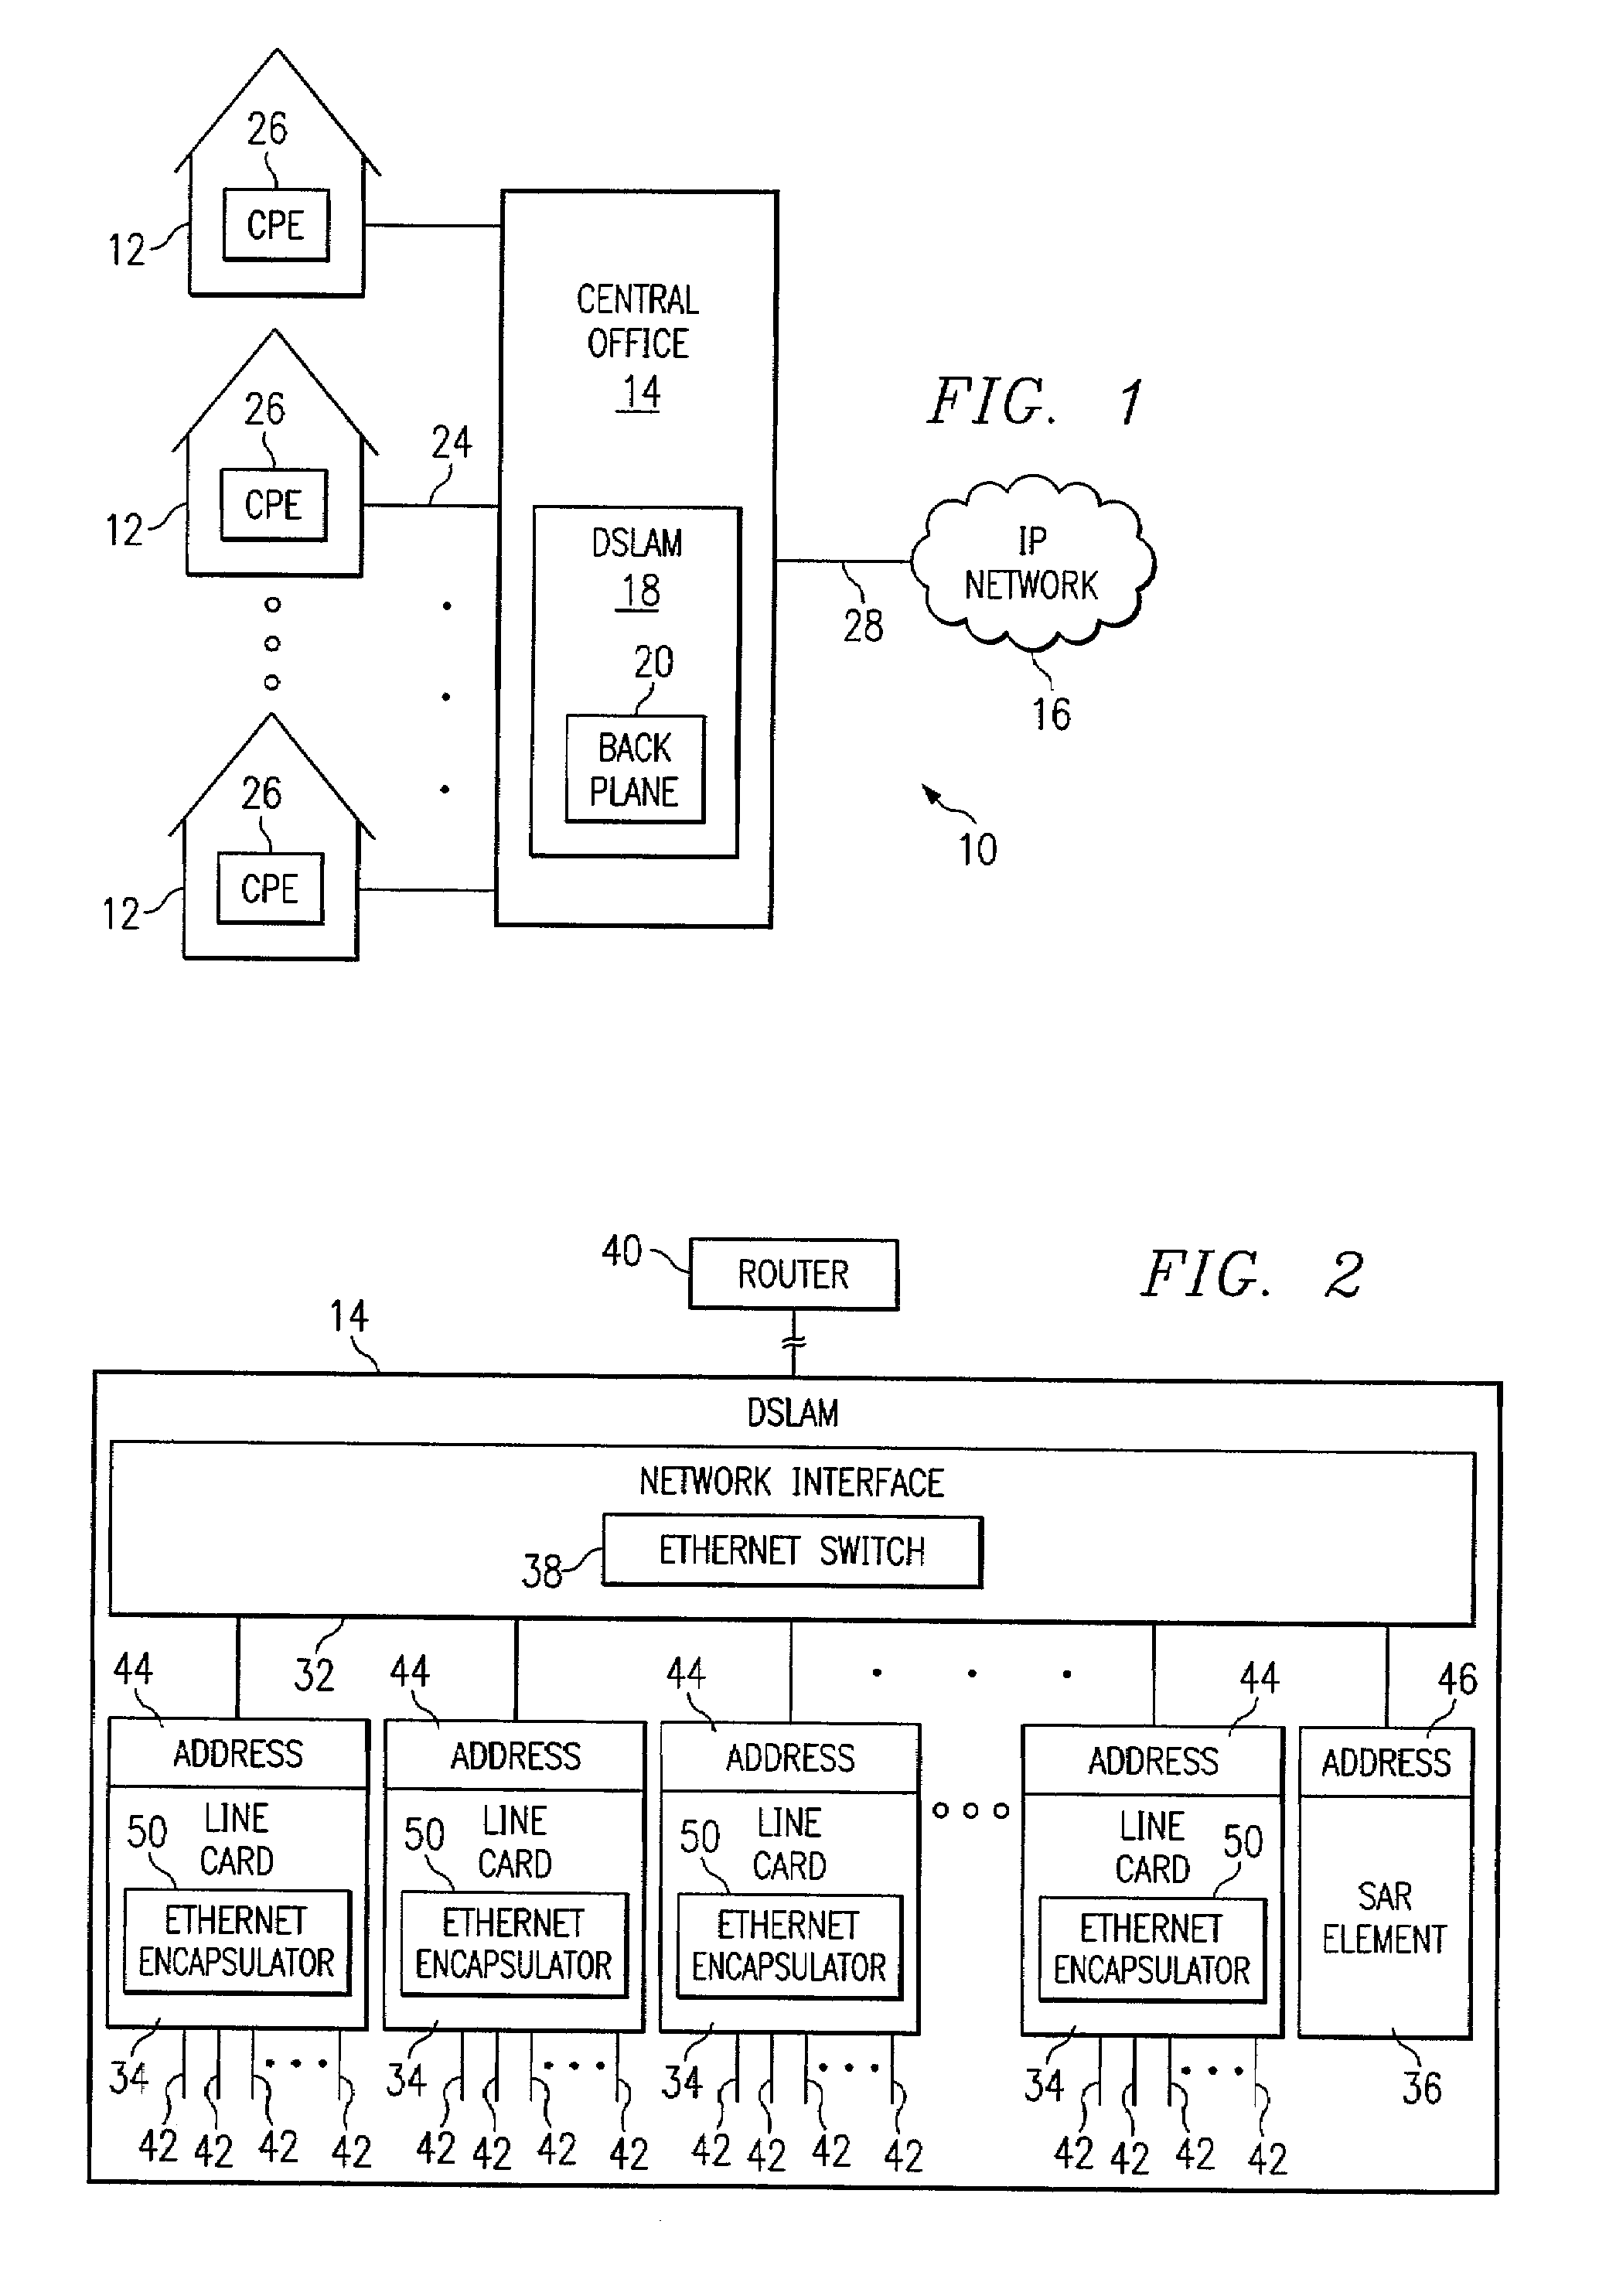 System and method for communicating asynchronous transfer mode cells in a network environment